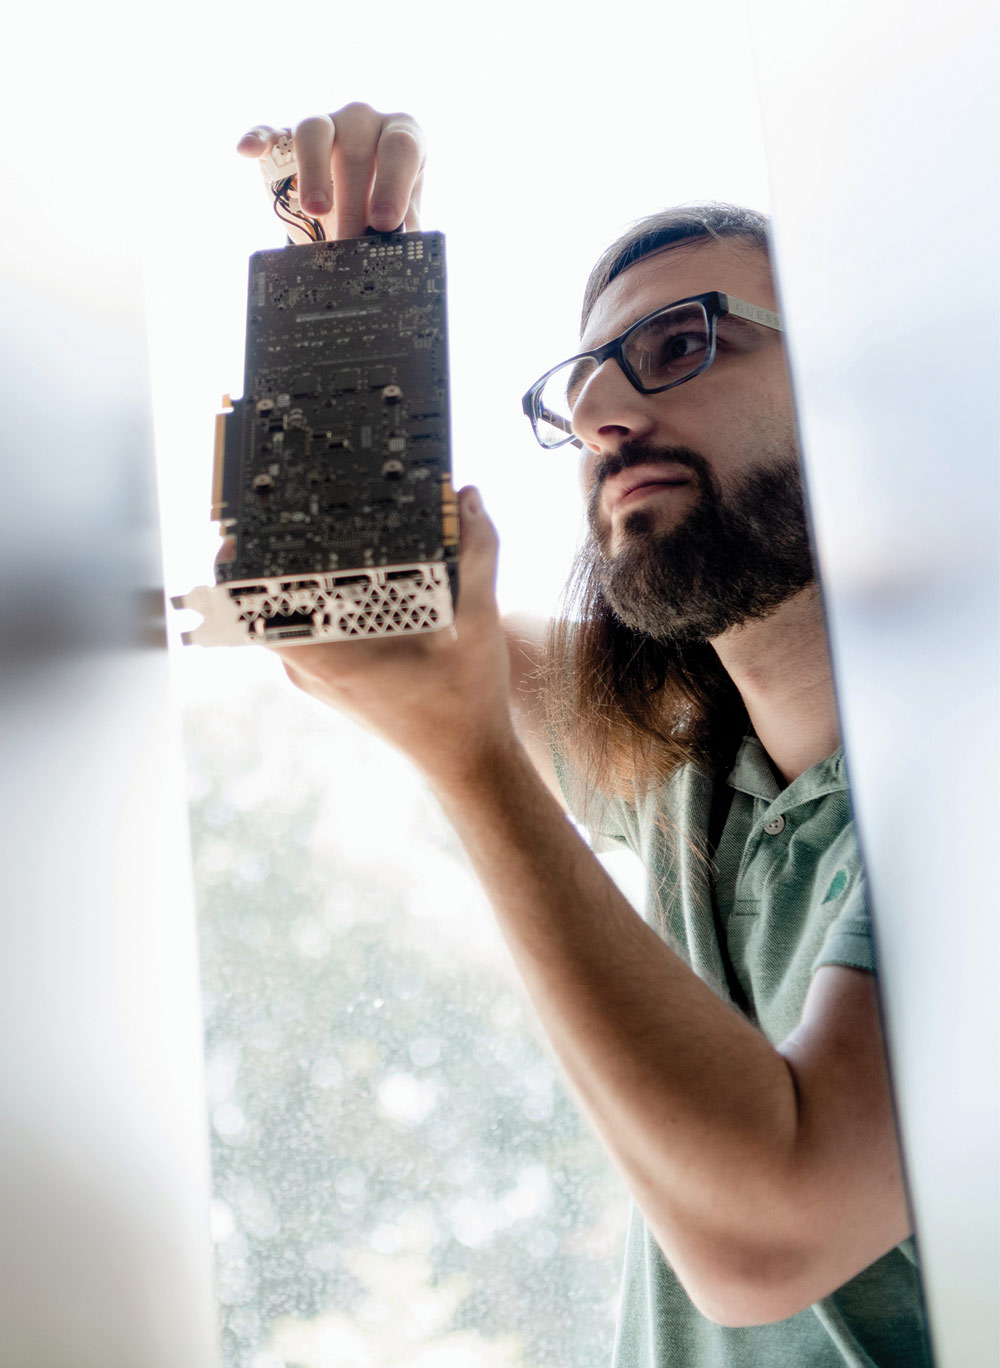 Student holding up computer circuit board looking intently